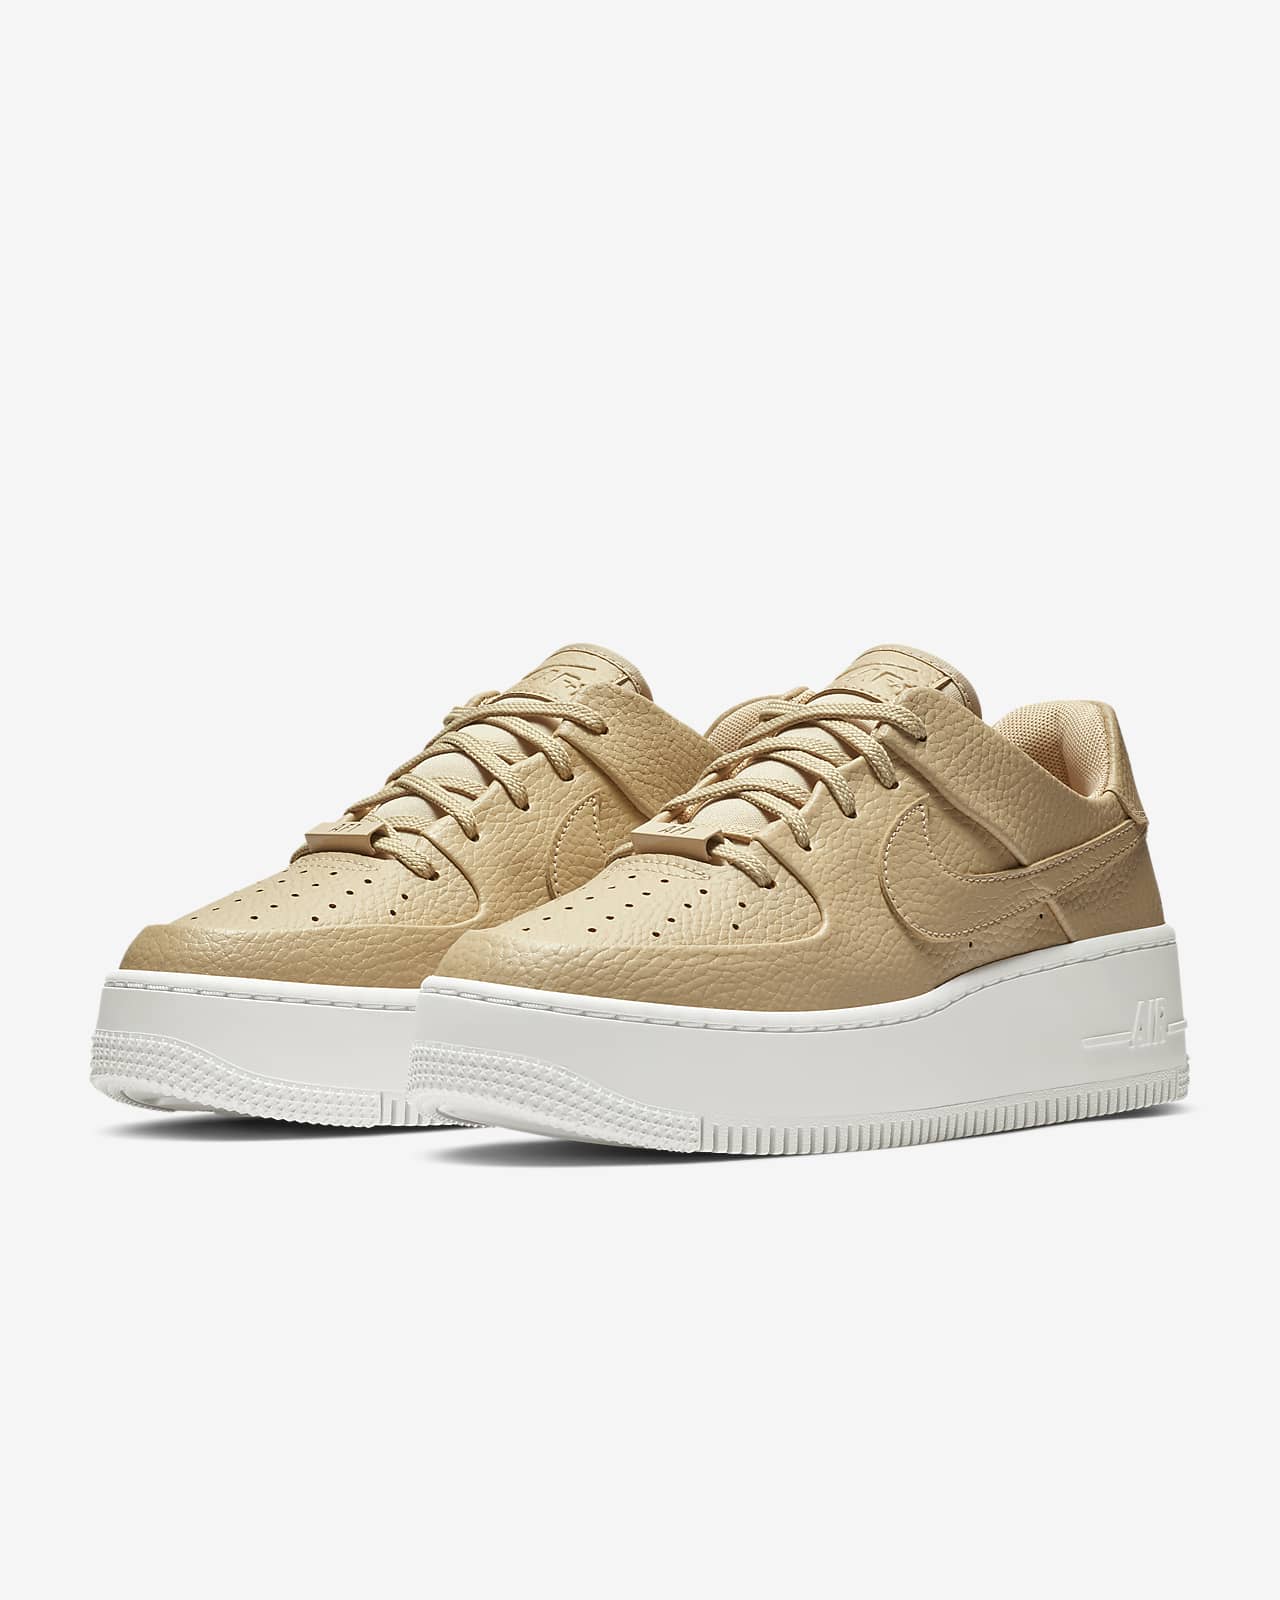 nike shoes nike air force 1 sage low women's stores